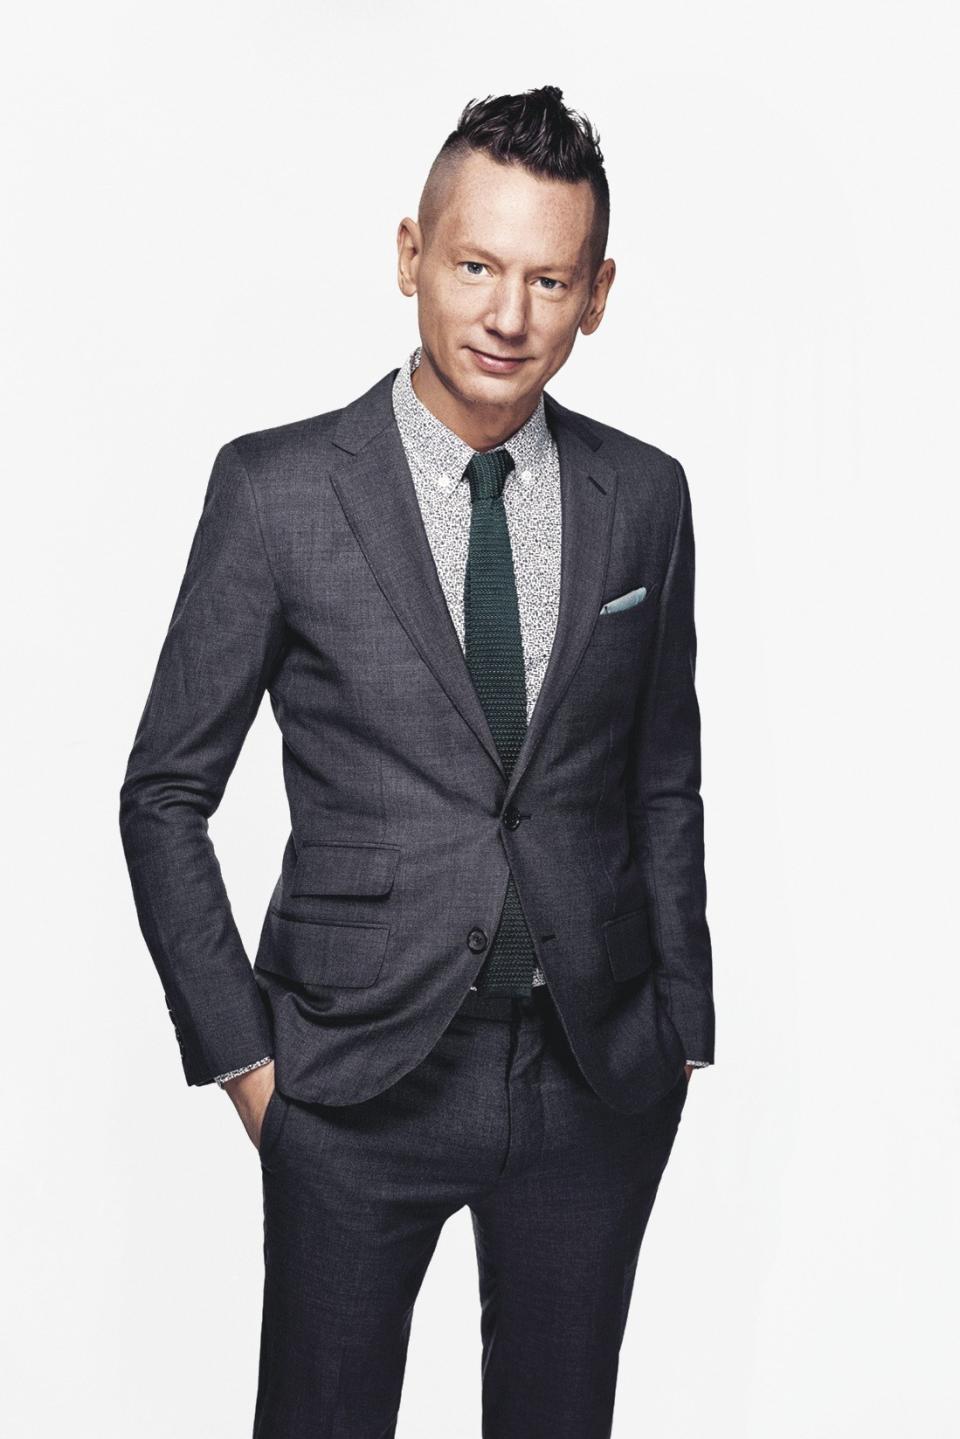 Editor-in-chief Jim Nelson on his 15 years at the helm of <em>GQ</em>.